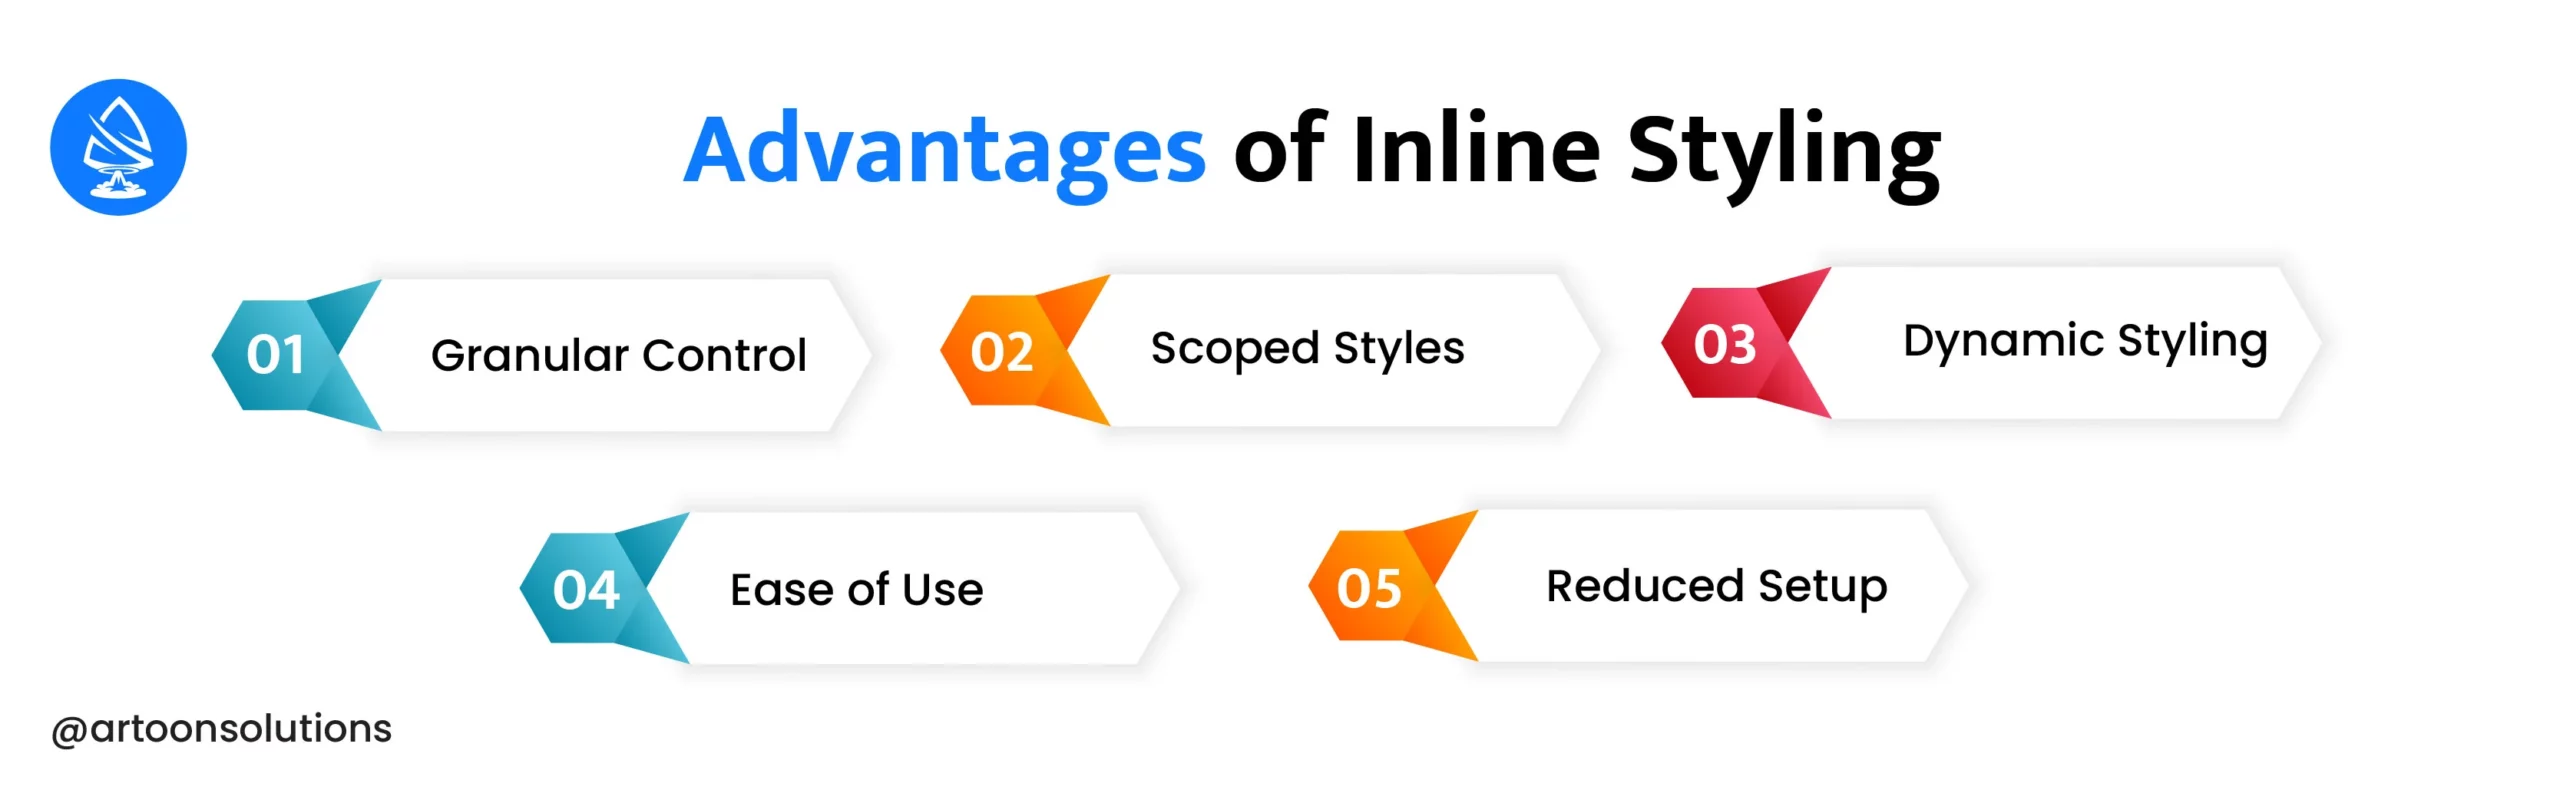 Advantages of Inline Styling